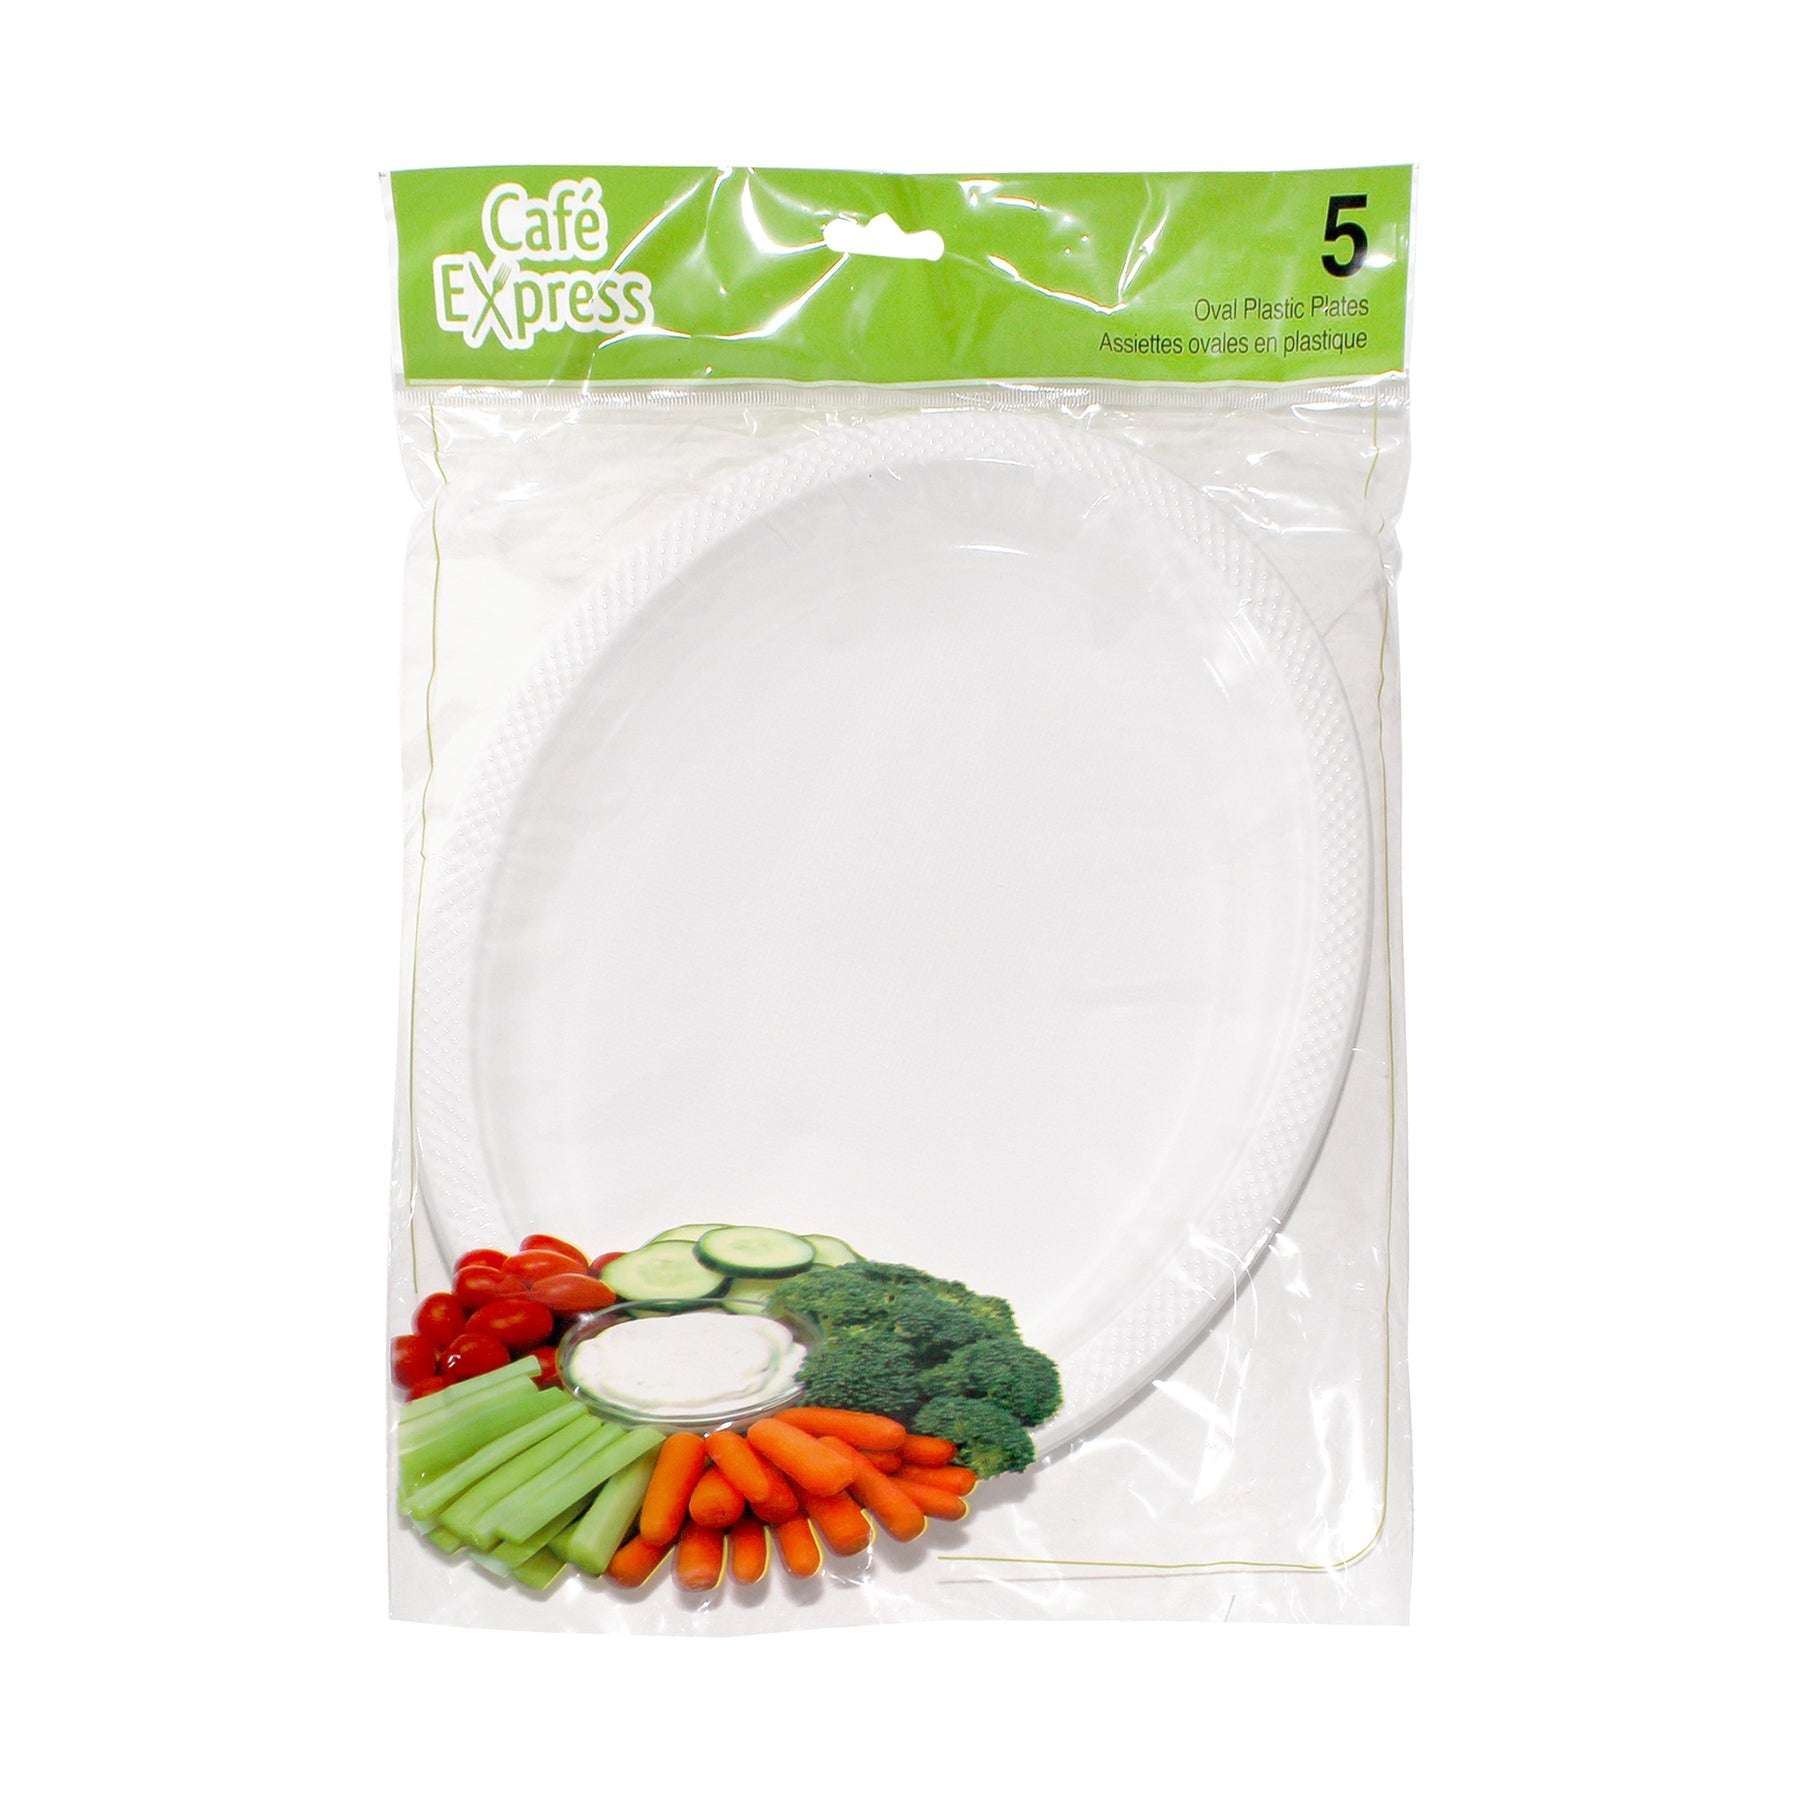 Café Express 5 Oval Plates White Plastic 11.3x9in